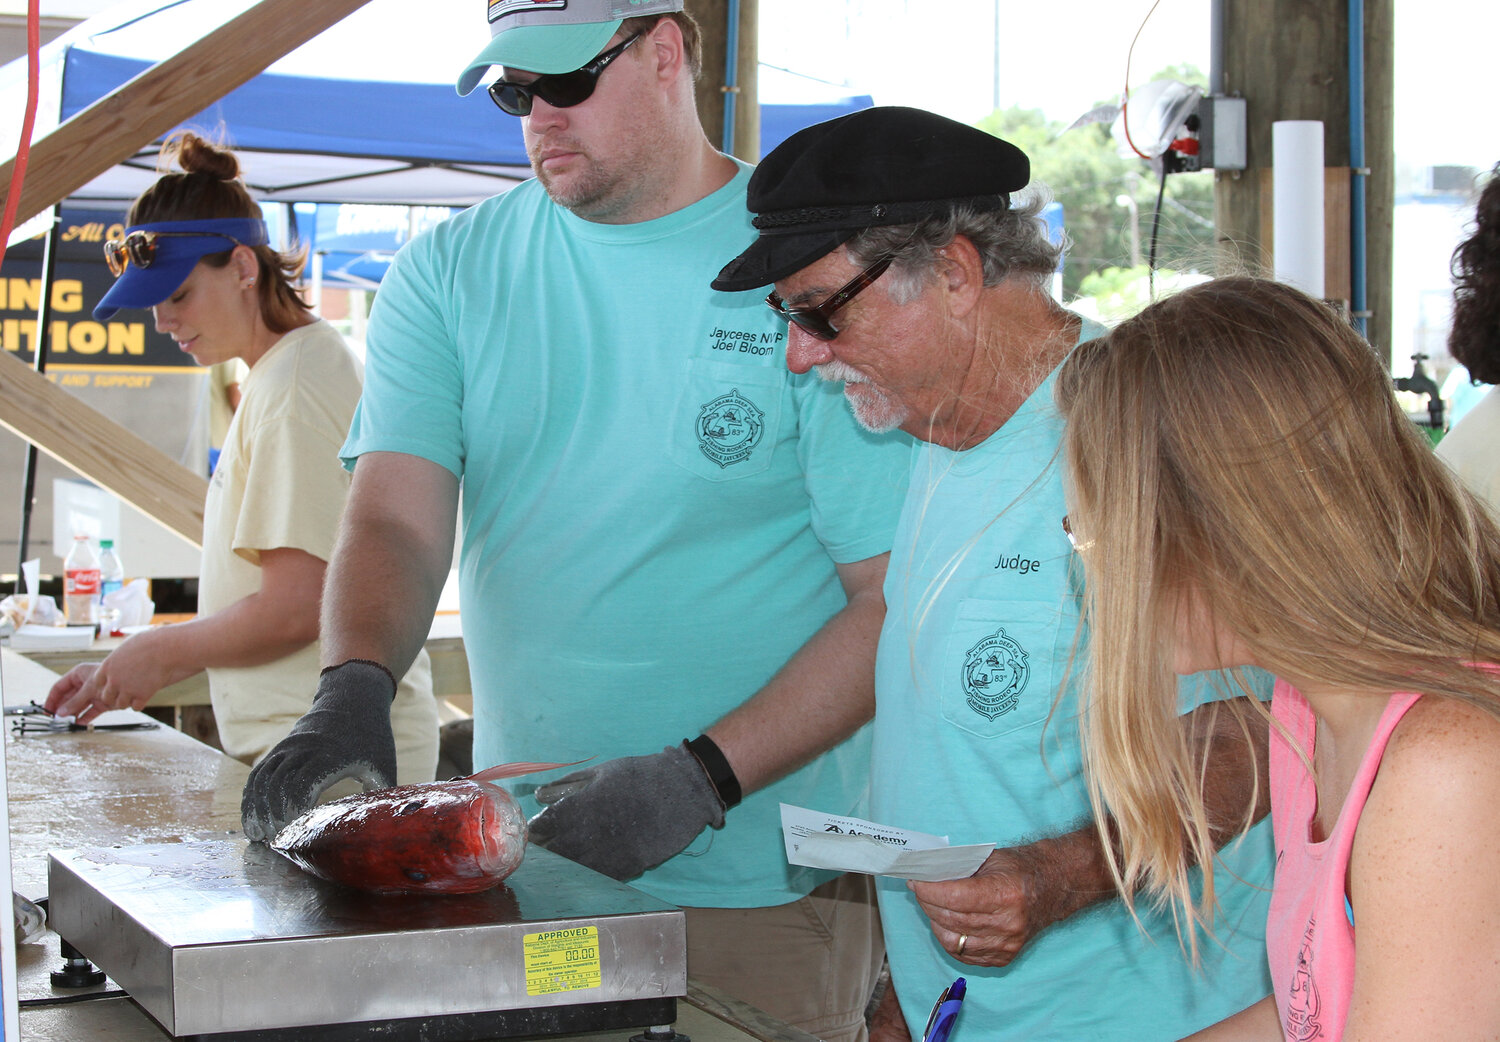 As head rodeo judge, Shipp weighs in another of Alabama's signature fish, the red snapper.